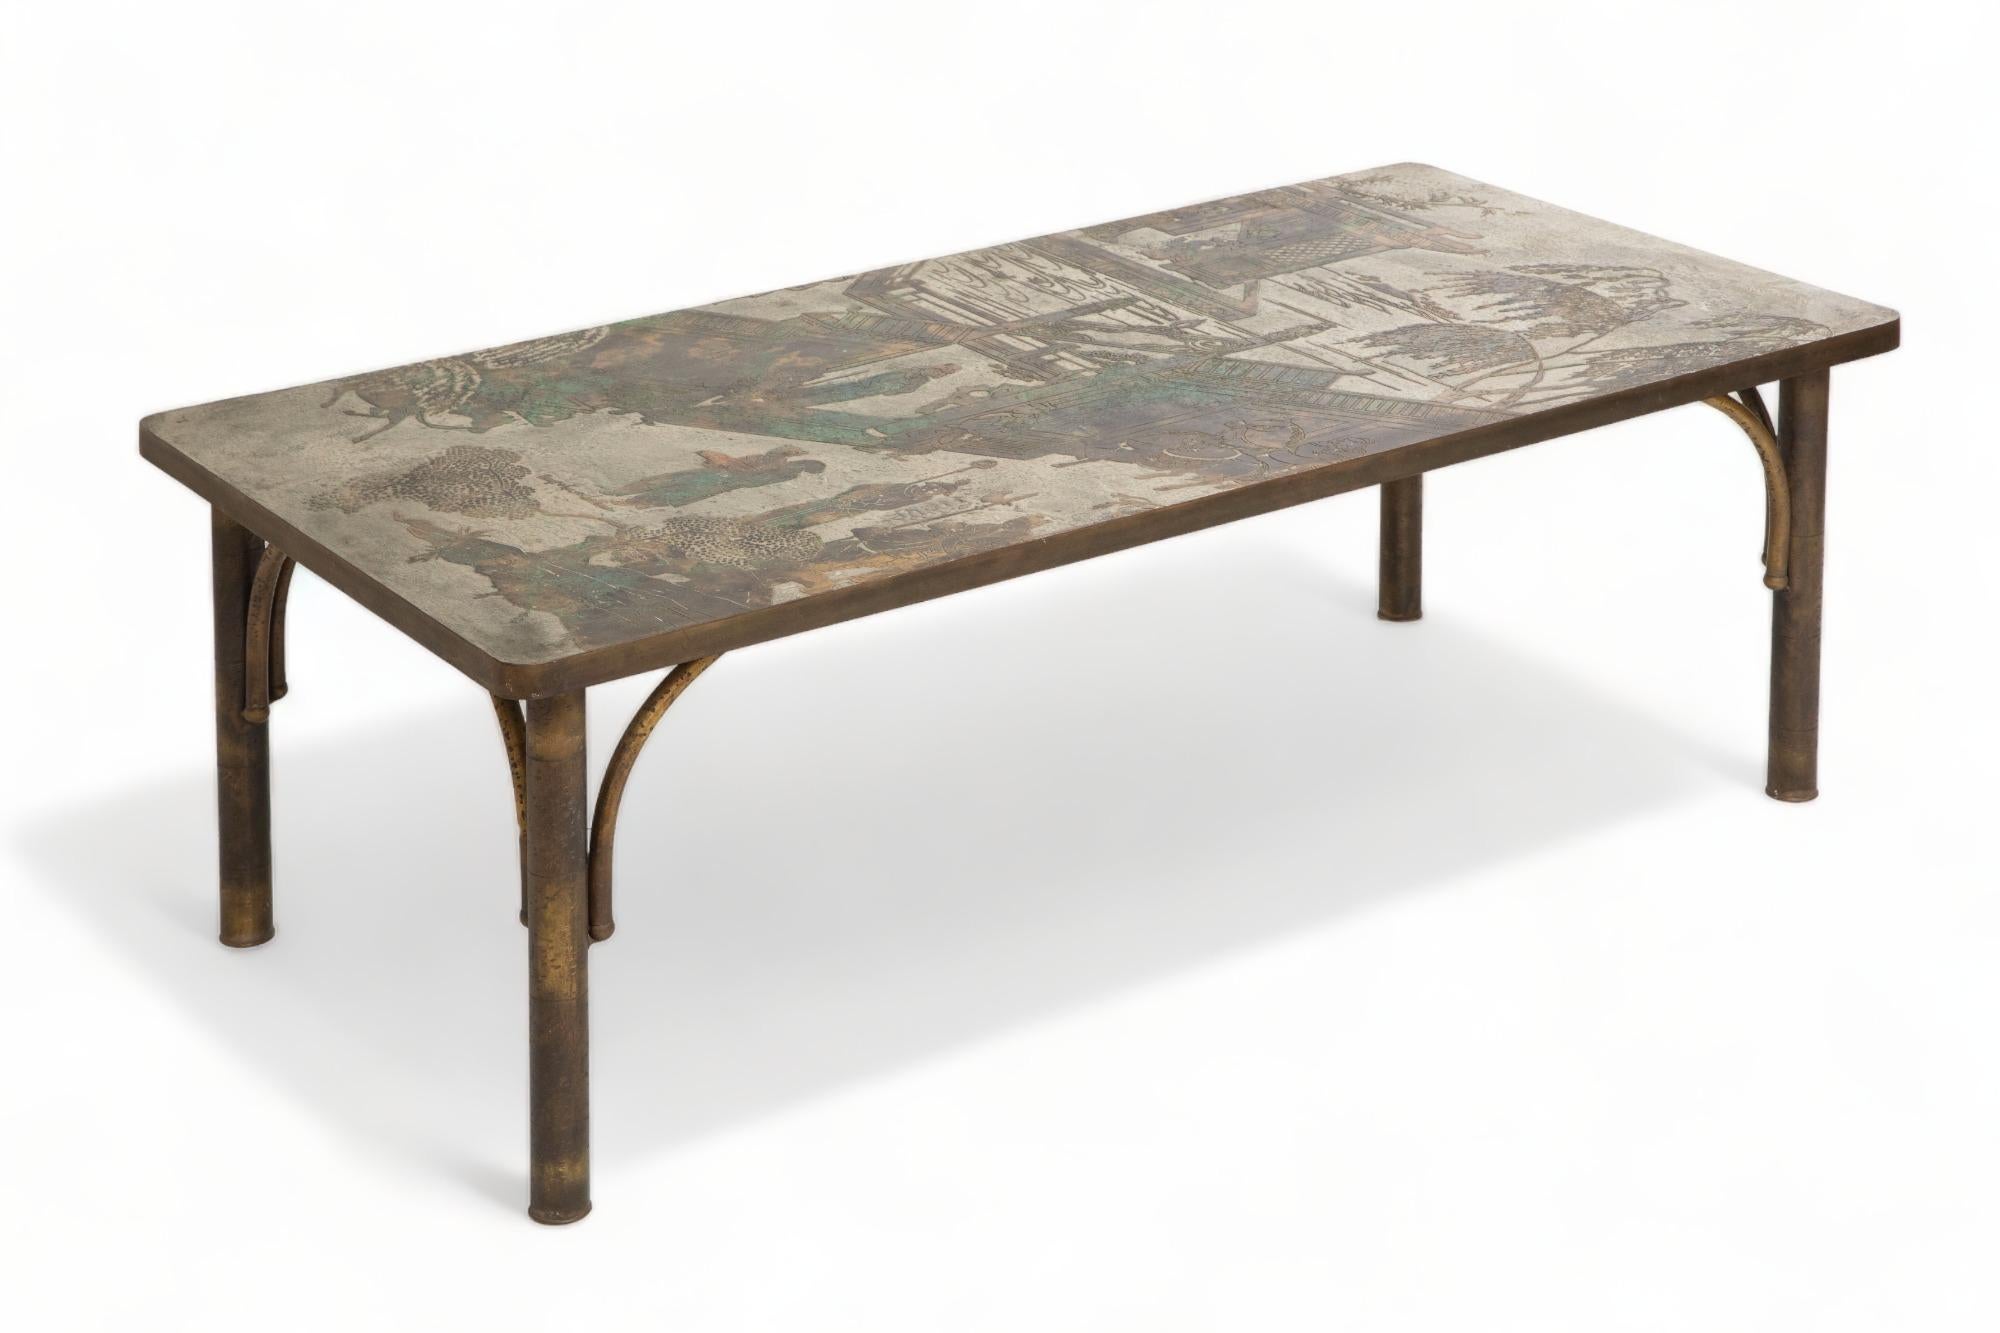  Rectangular Chinoiserie Chan coffee table by Philip and Kelvin LaVerne
Etched, patinated and polychromed bronze and pewter,
Retains a rich variety of multicolored patinas
Arched bamboo legs
Signed to the table top
Good collector's